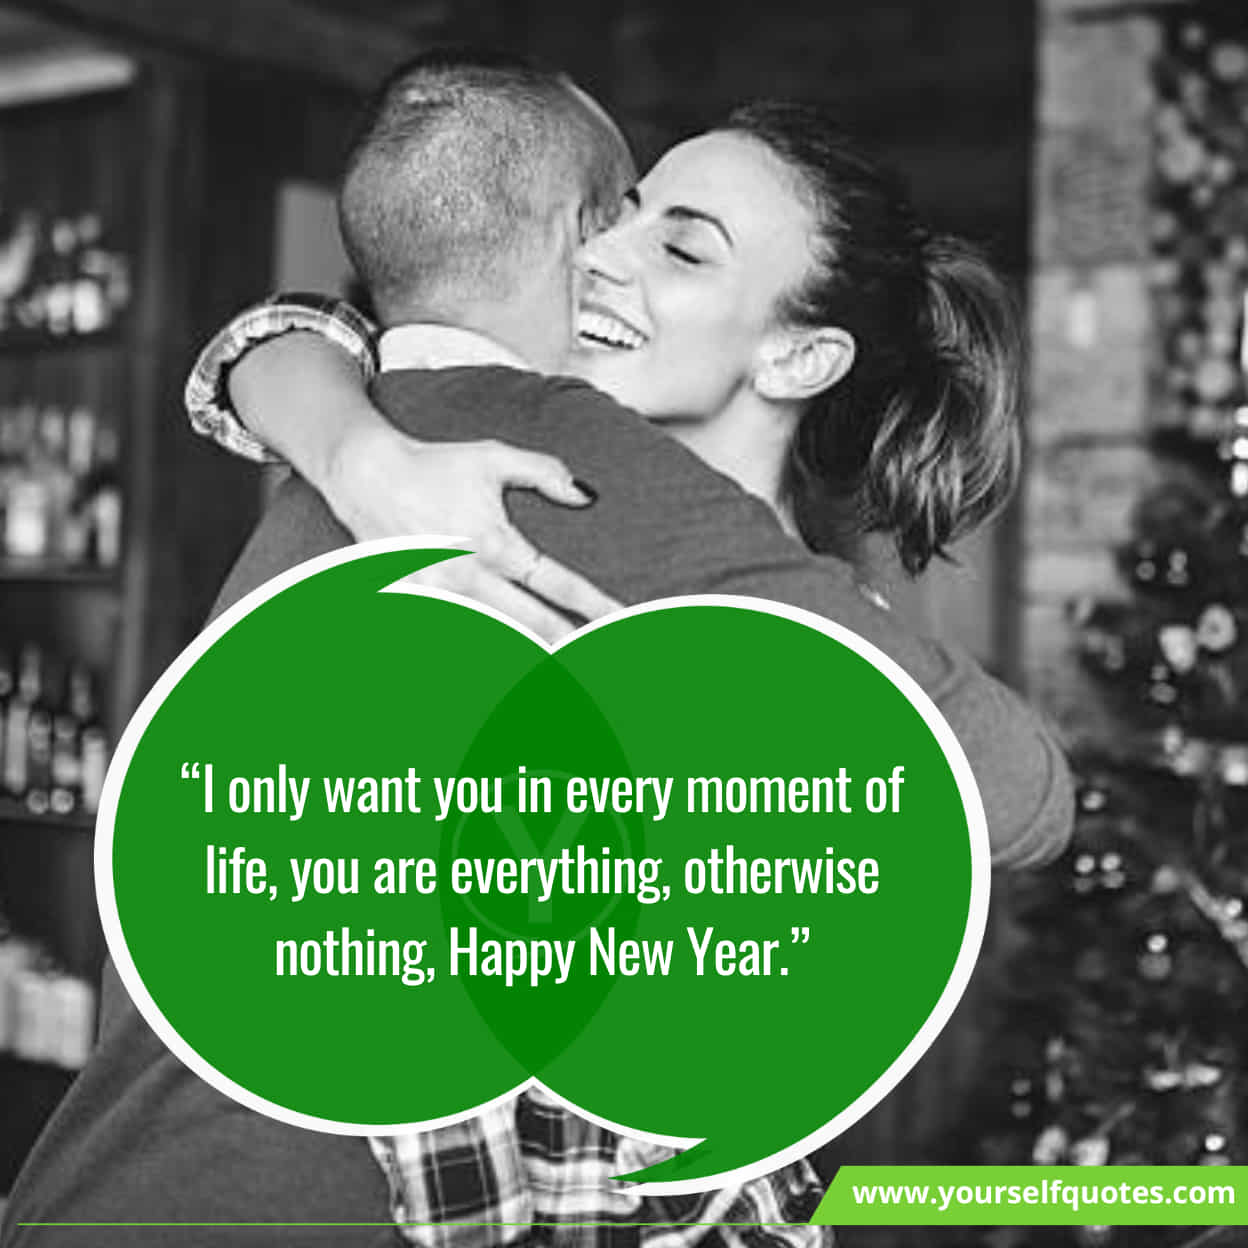 Adorable Wishes For Girlfriend On New Year